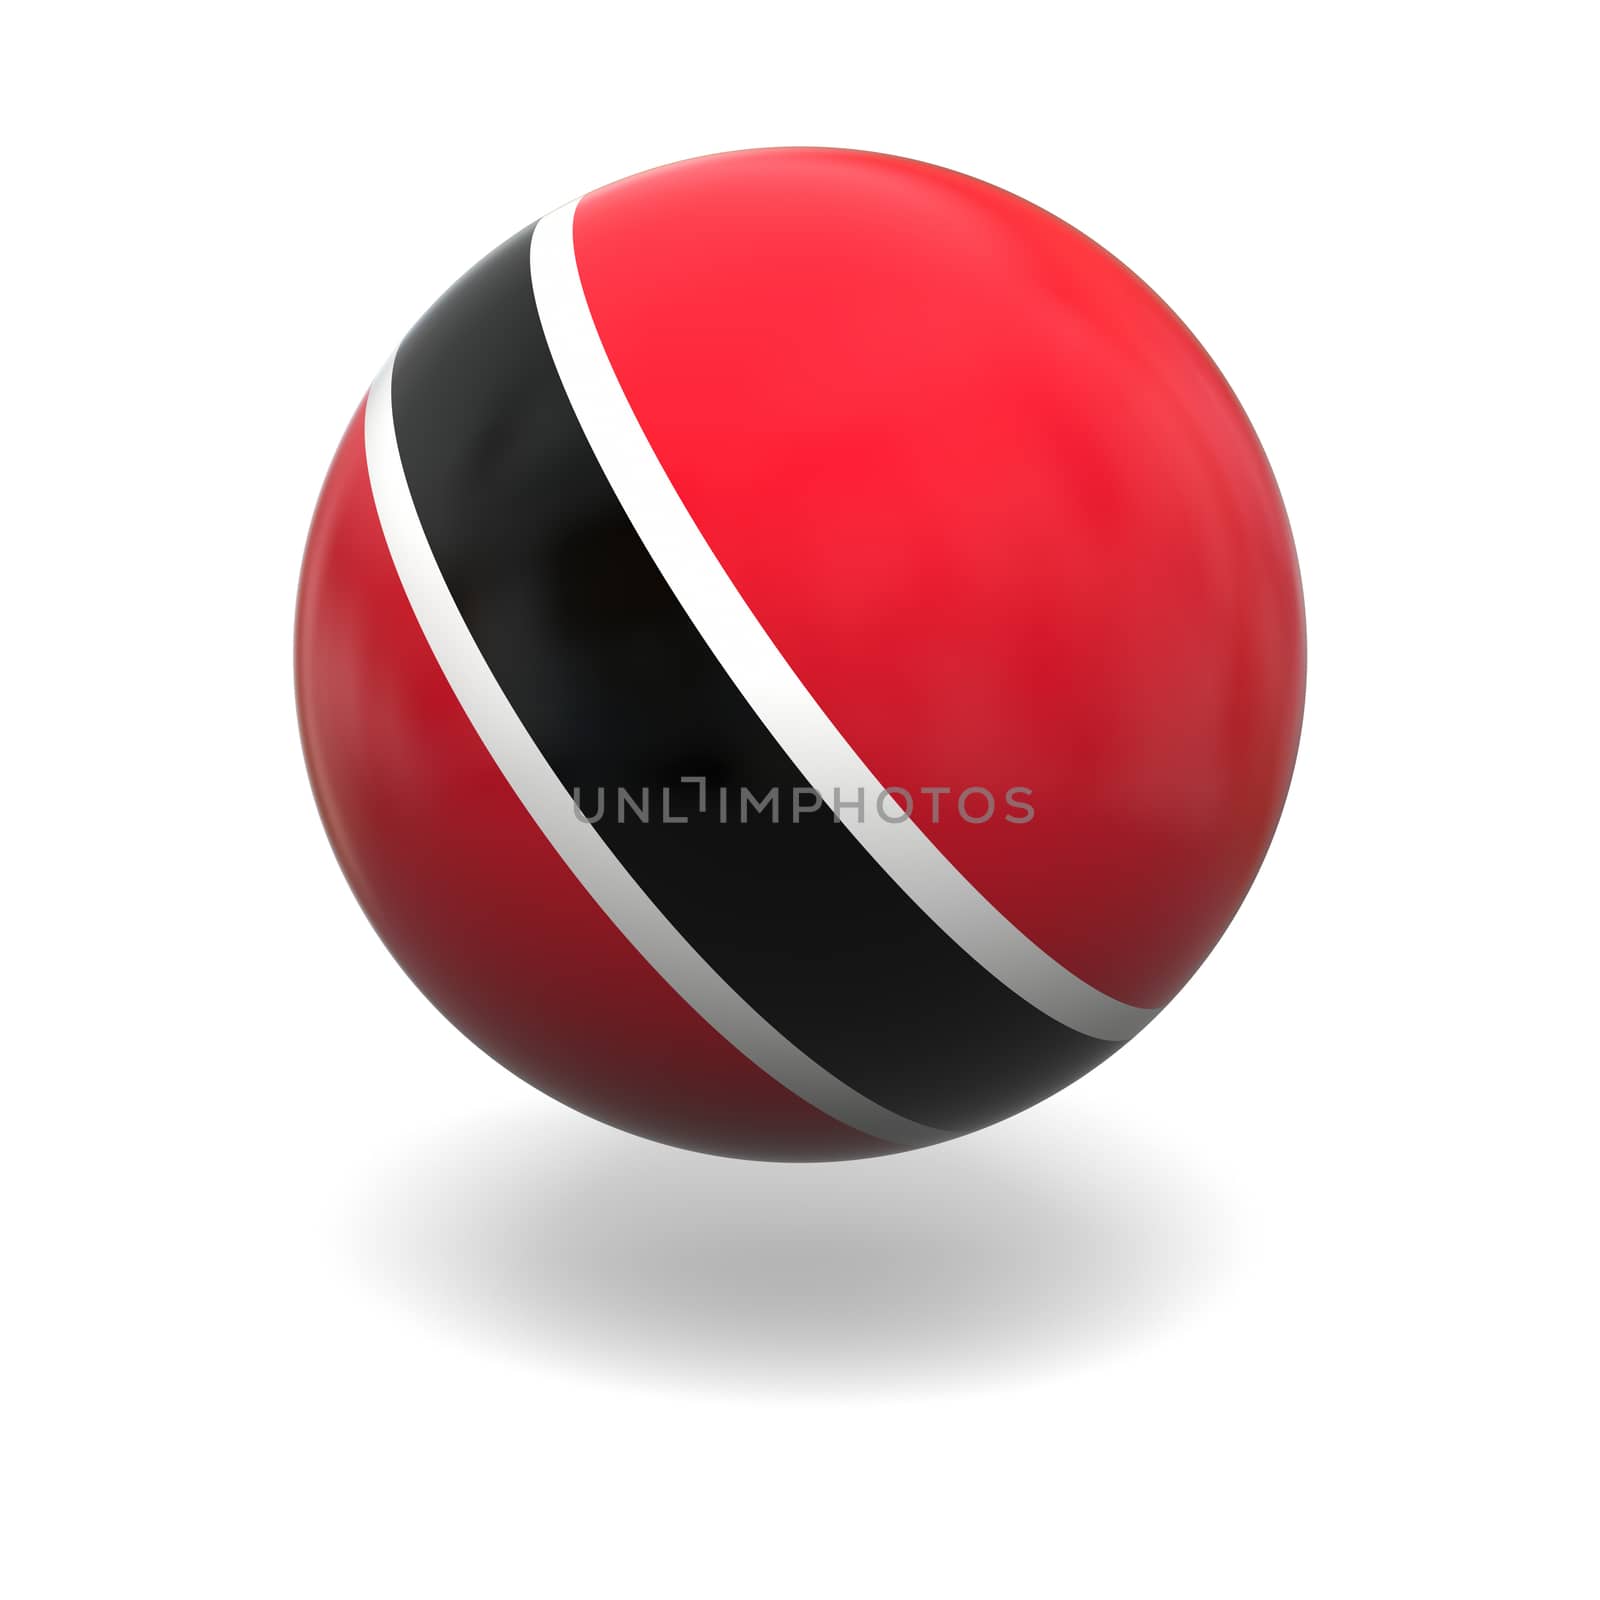 National flag of Trinidad and Tobago on sphere isolated on white background